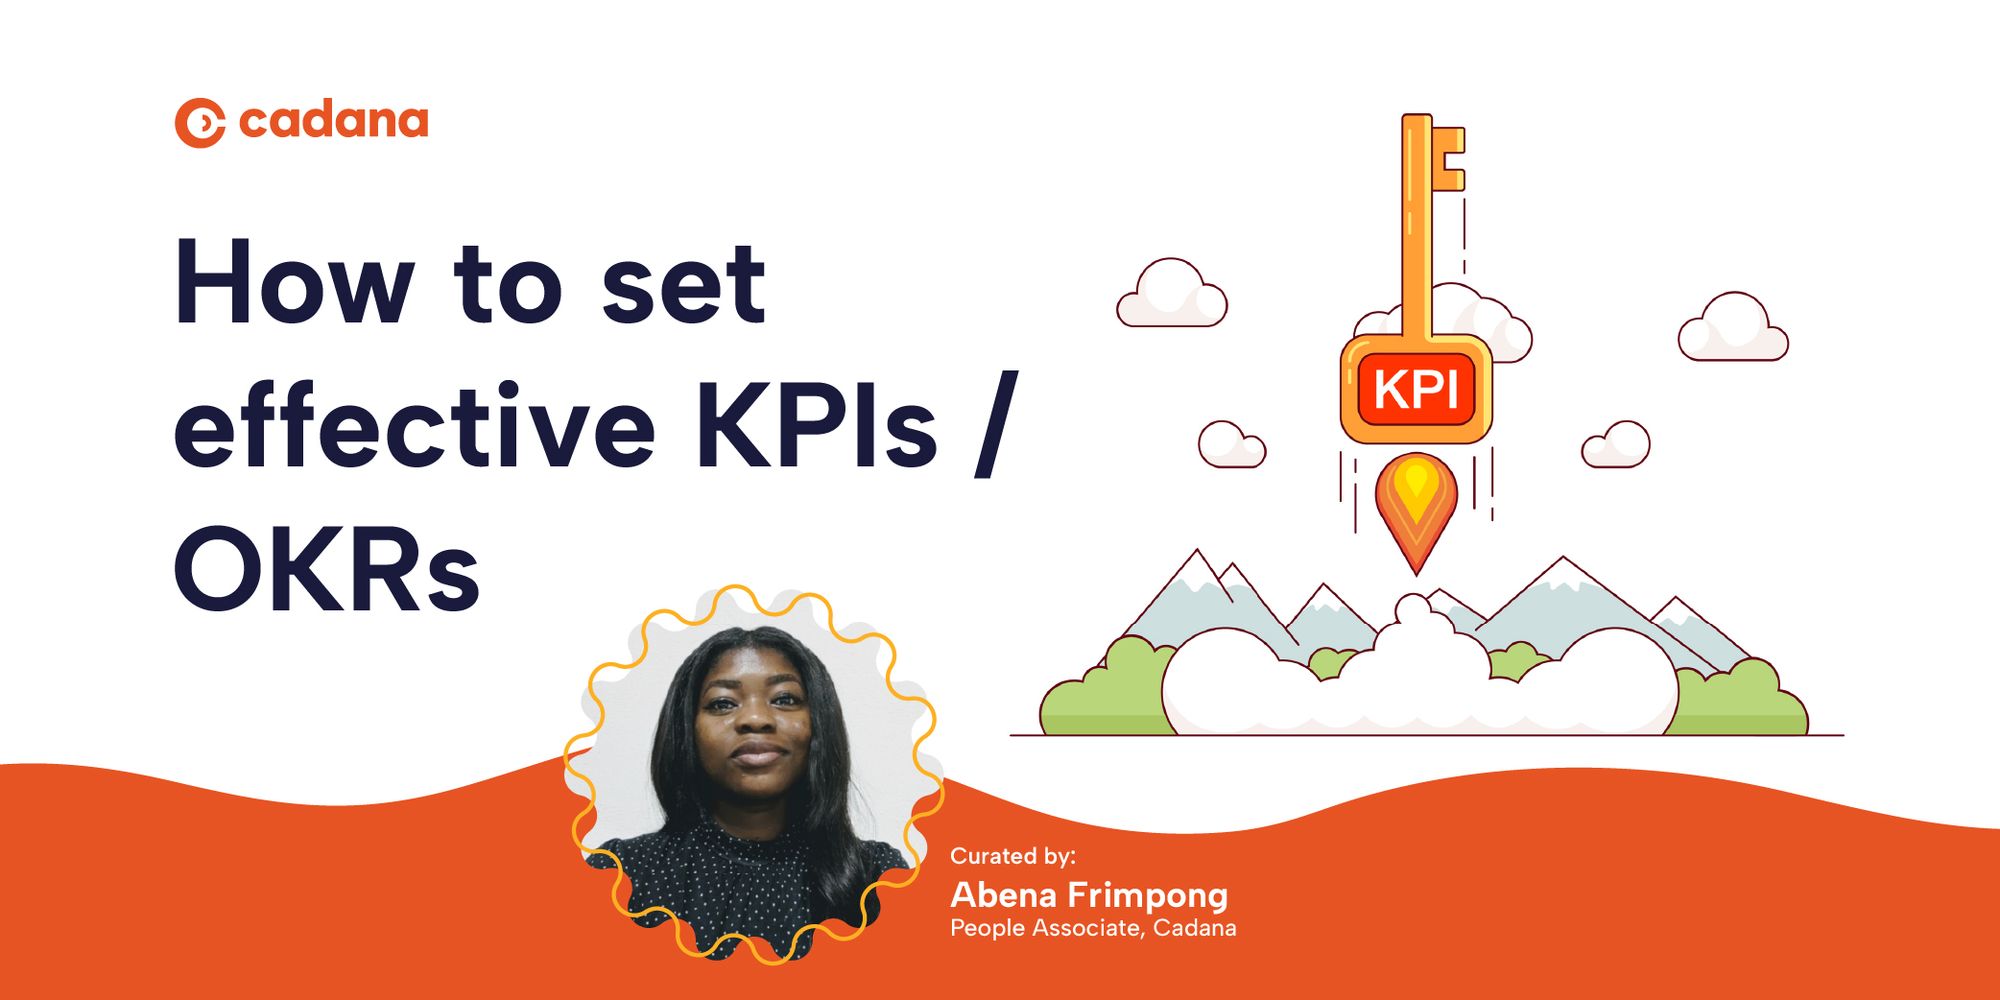 How to set effective KPIs / OKRs